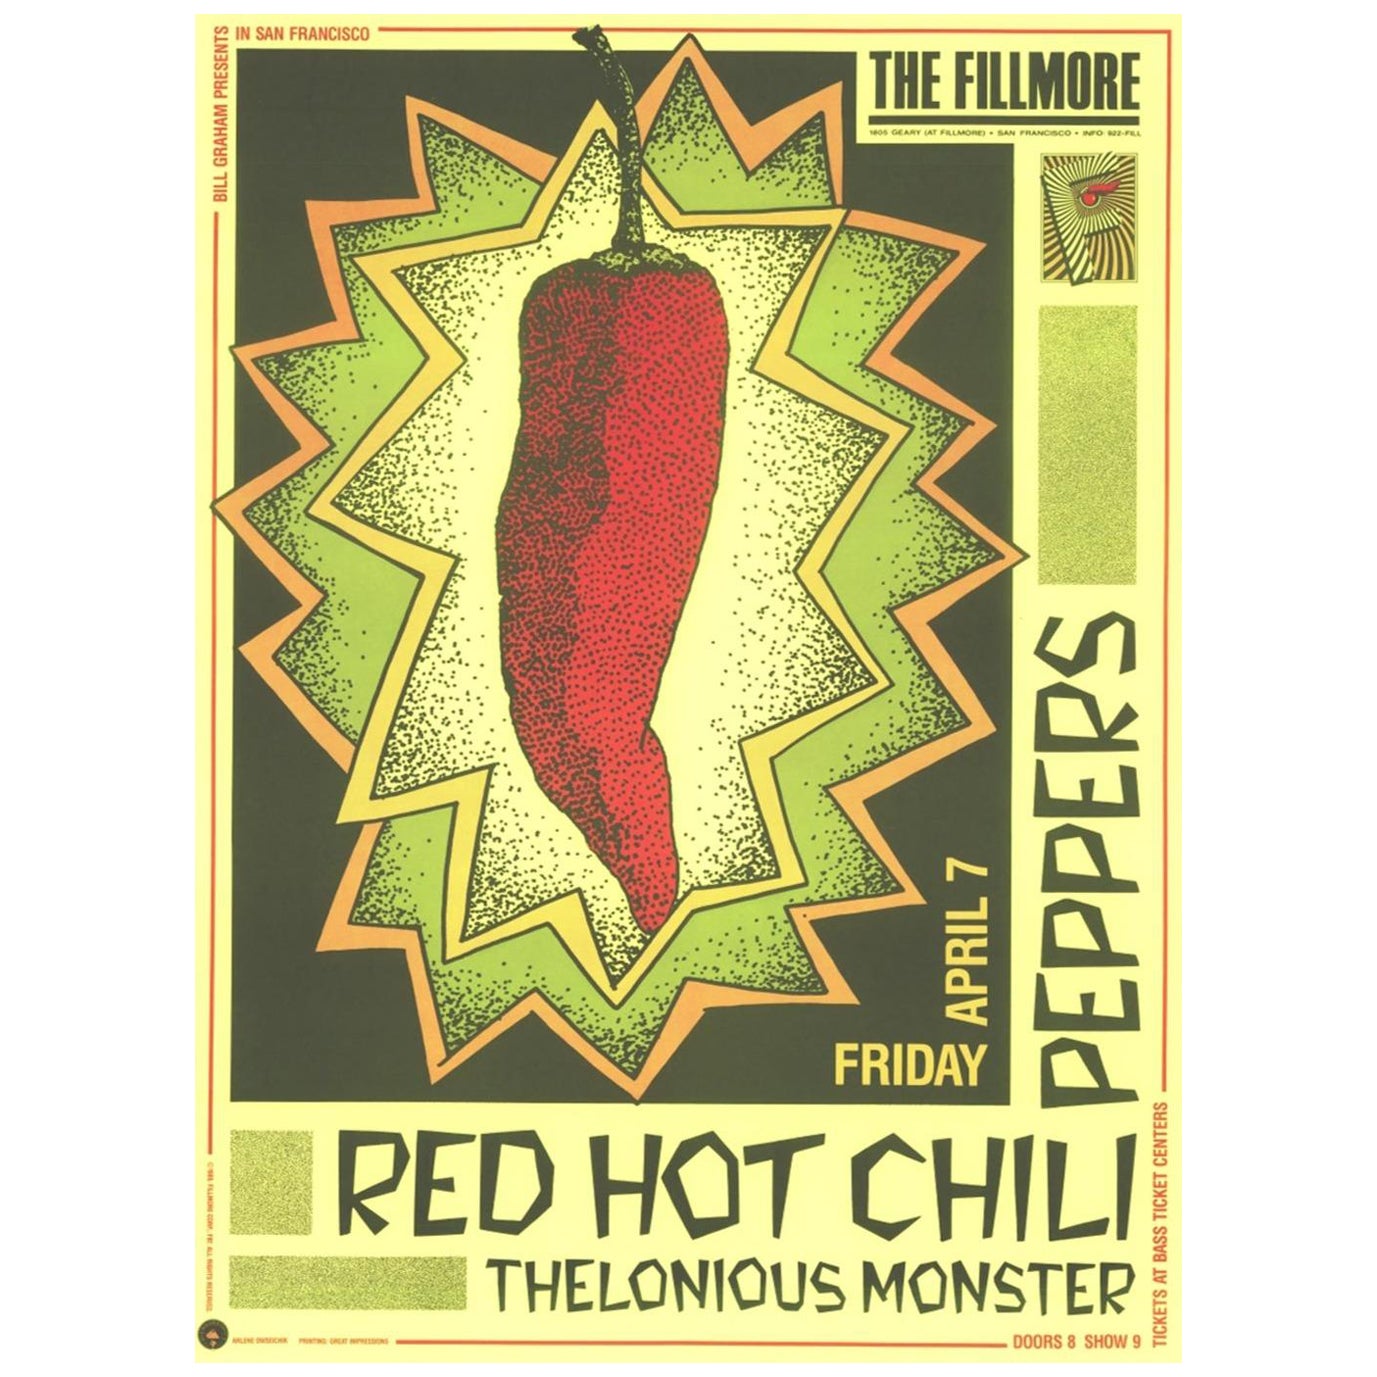 1989 Red Hot Chili Peppers - The Fillmore Original Vintage Poster